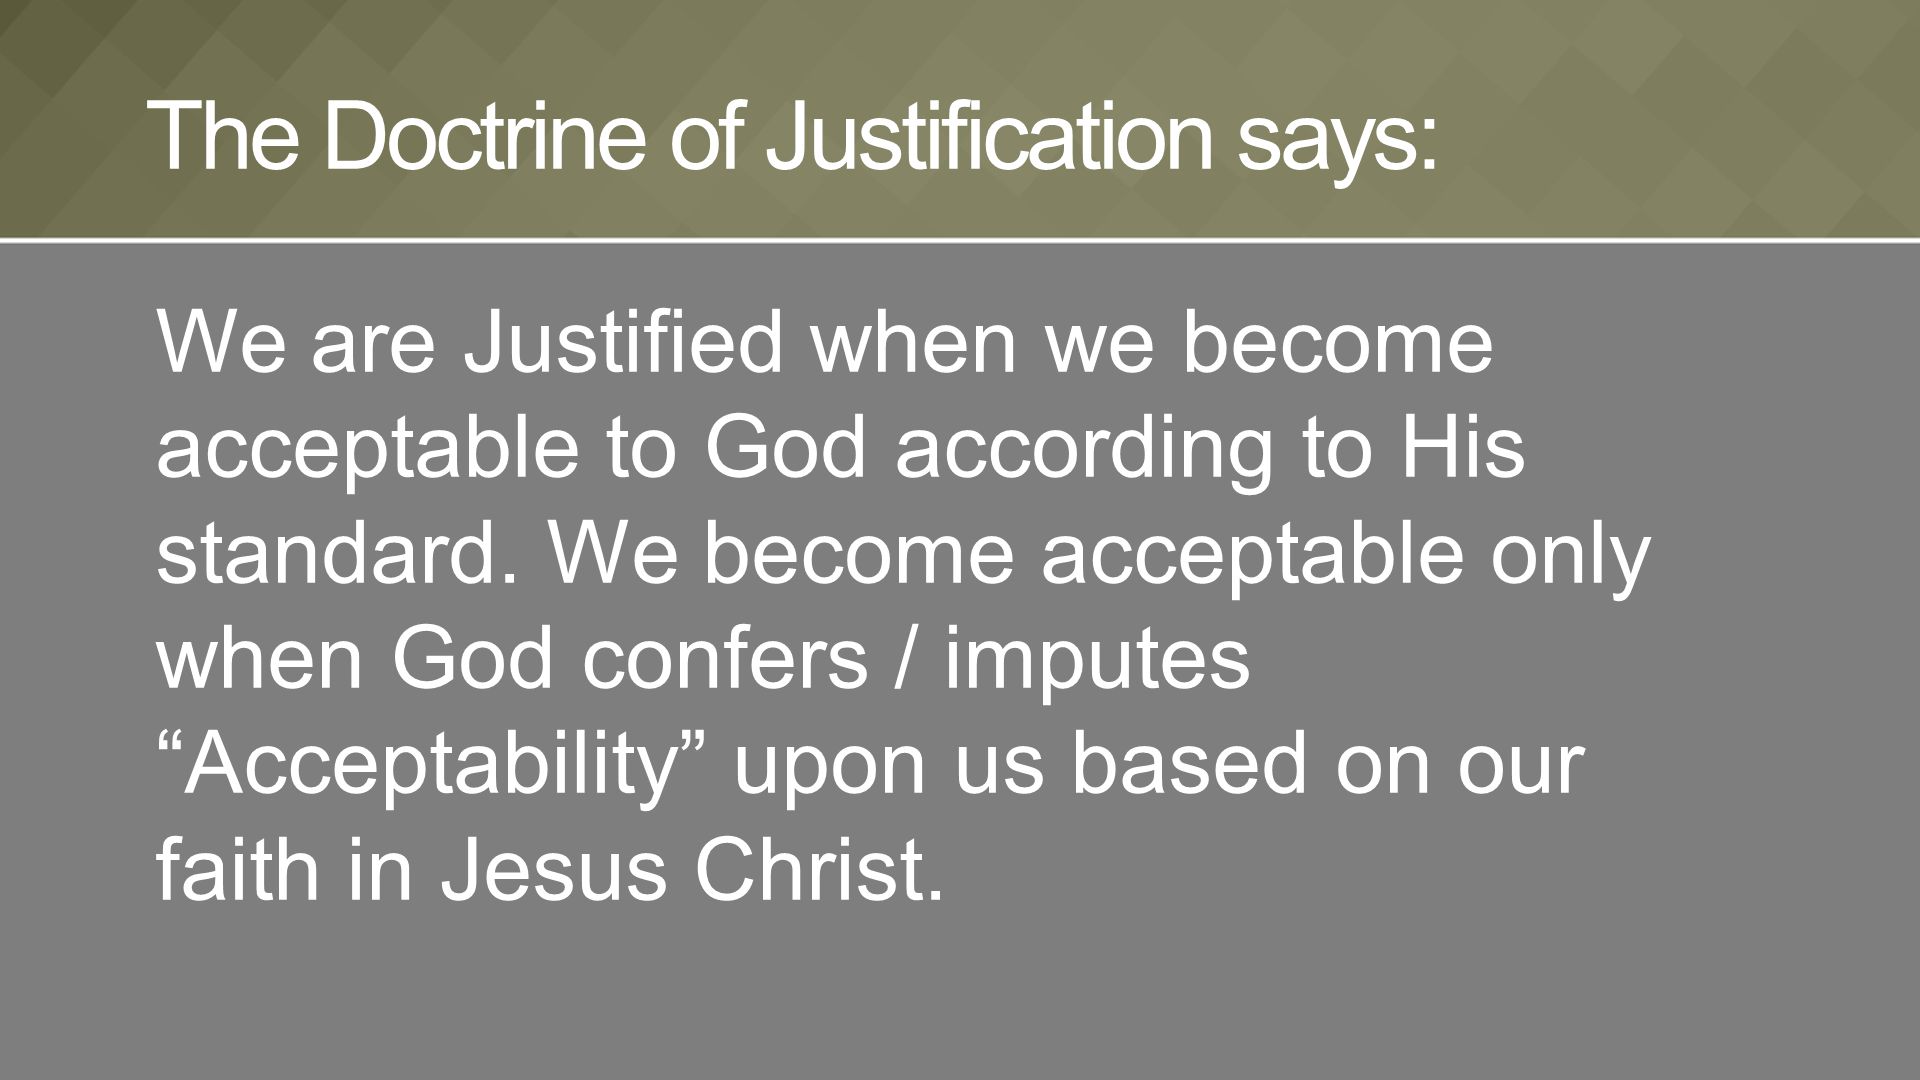 We are Justified when we become acceptable to God according to His standard.